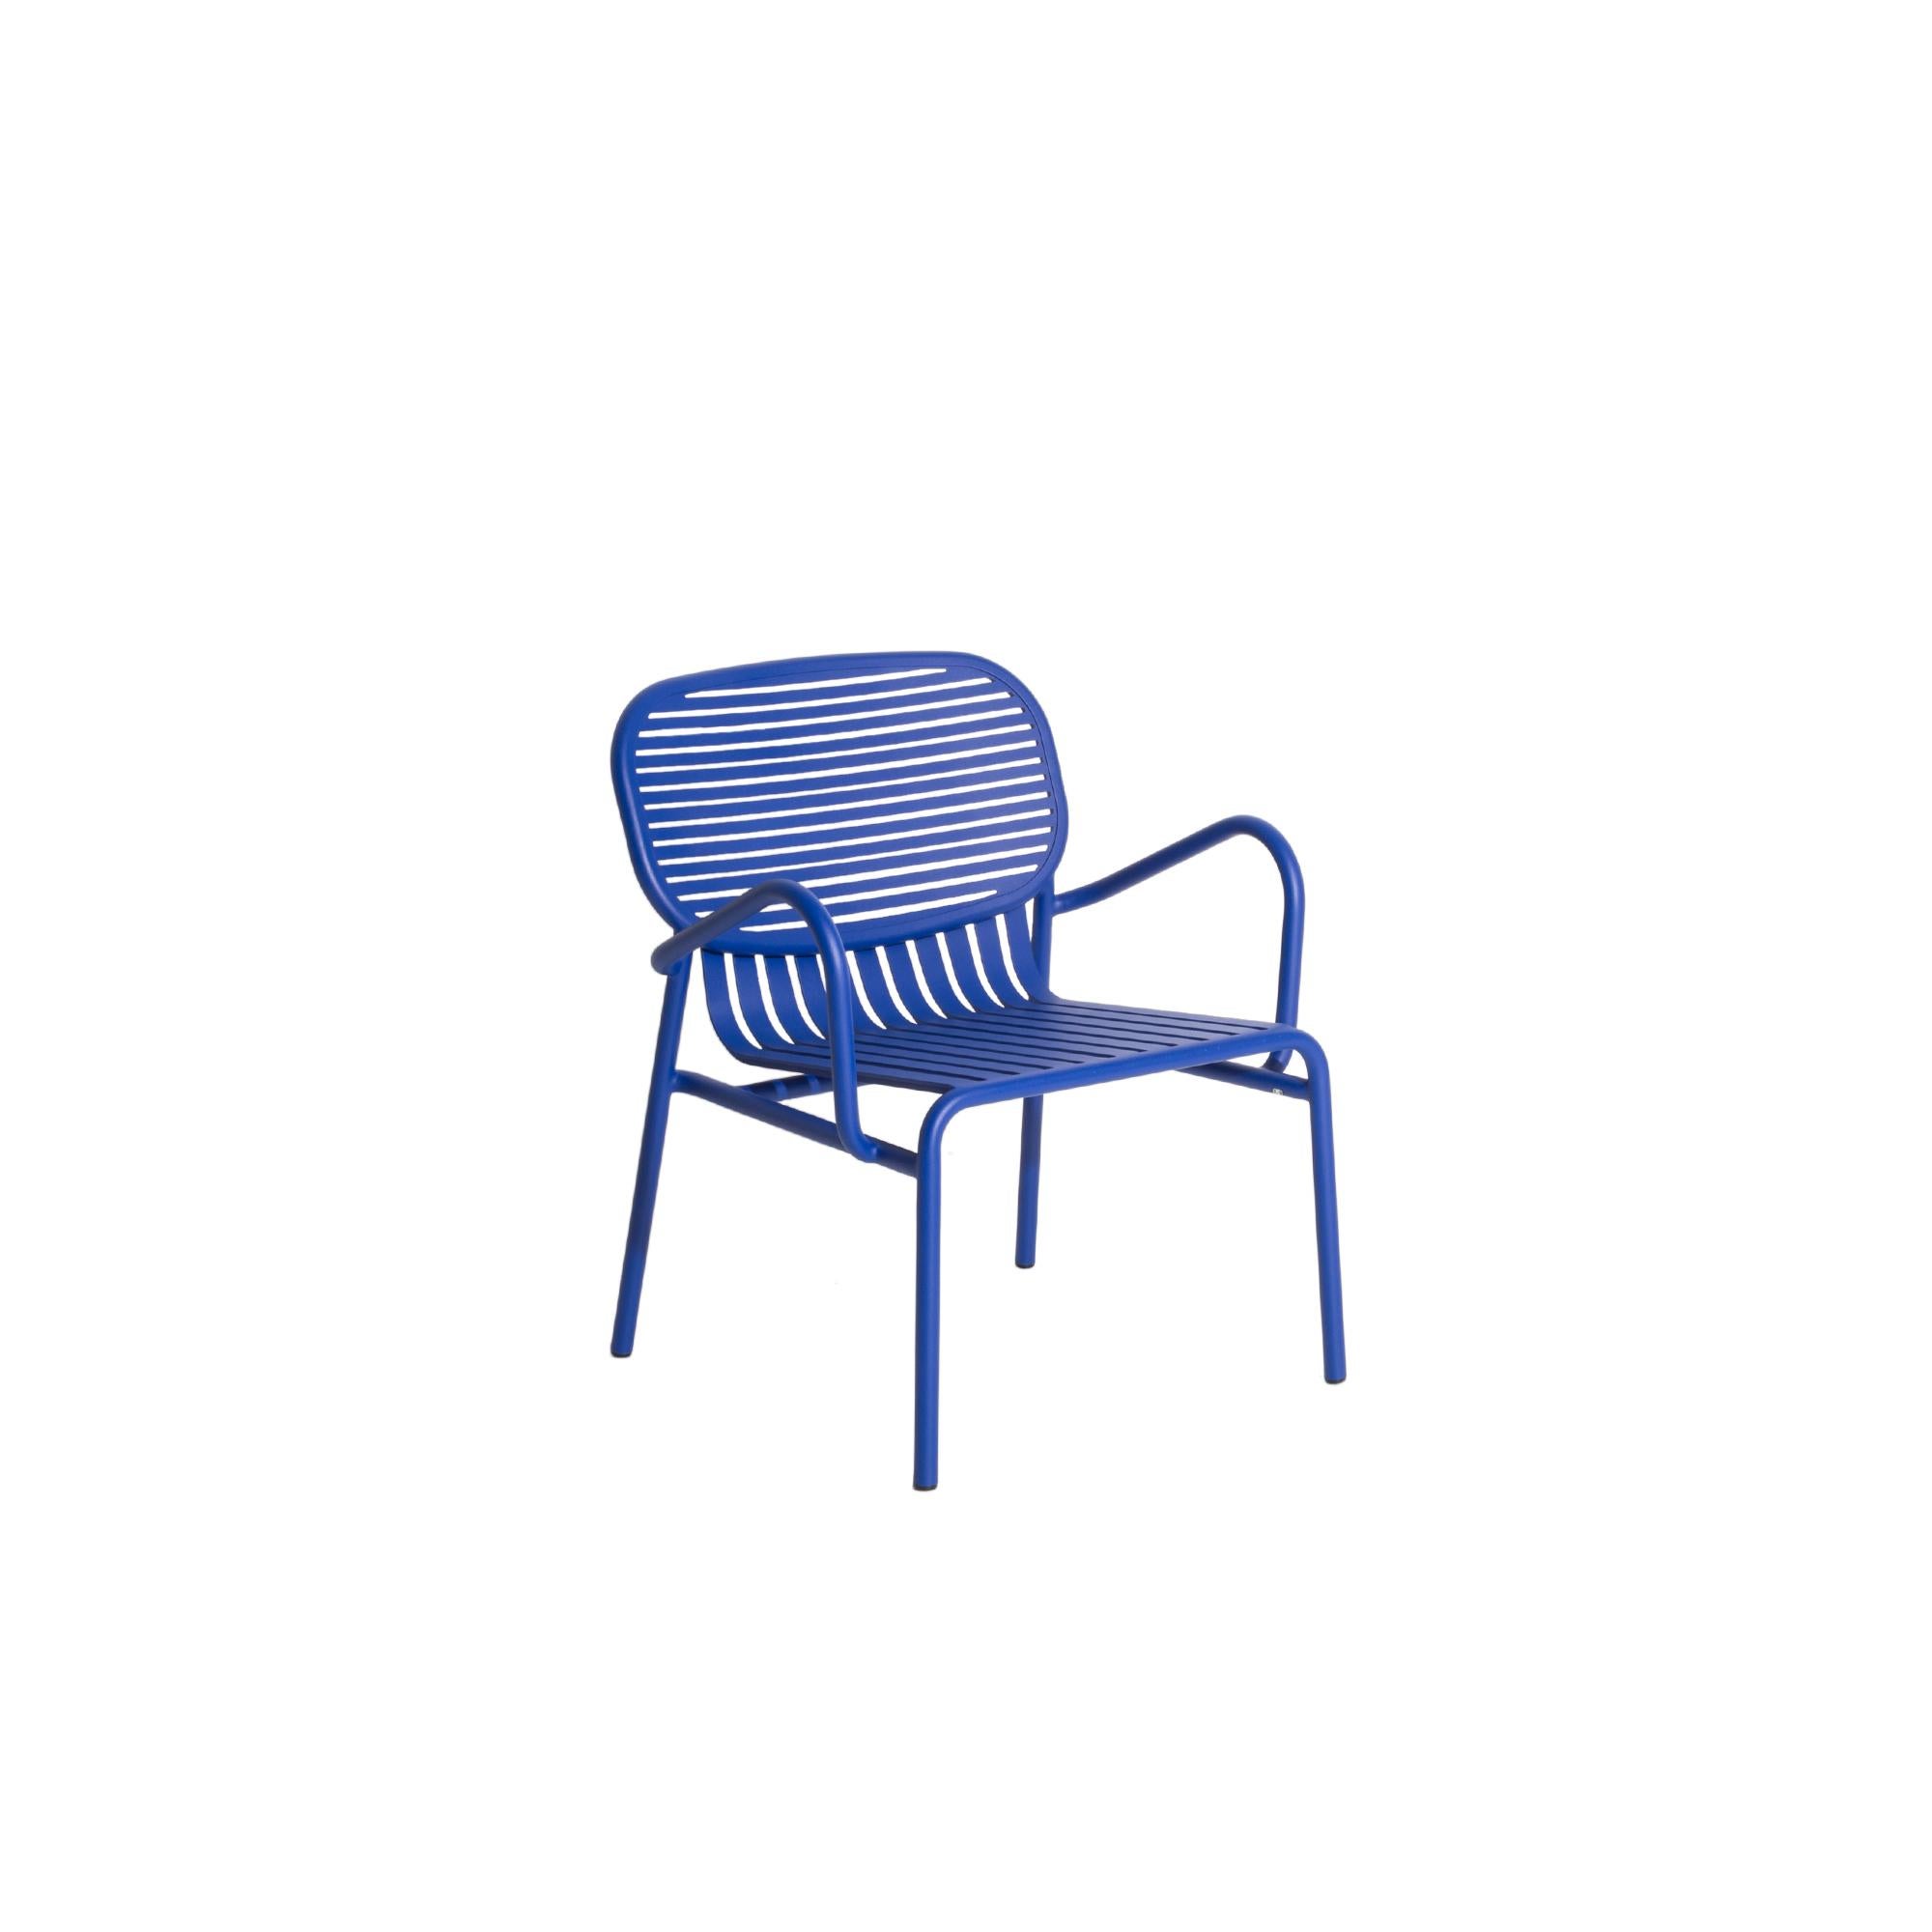 Petite Friture Week-End Armchair in Blue Aluminium by Studio BrichetZiegler, 2017

The week-end collection is a full range of outdoor furniture, in aluminium grained epoxy paint, matt finish, that includes 18 functions and 8 colours for the retail